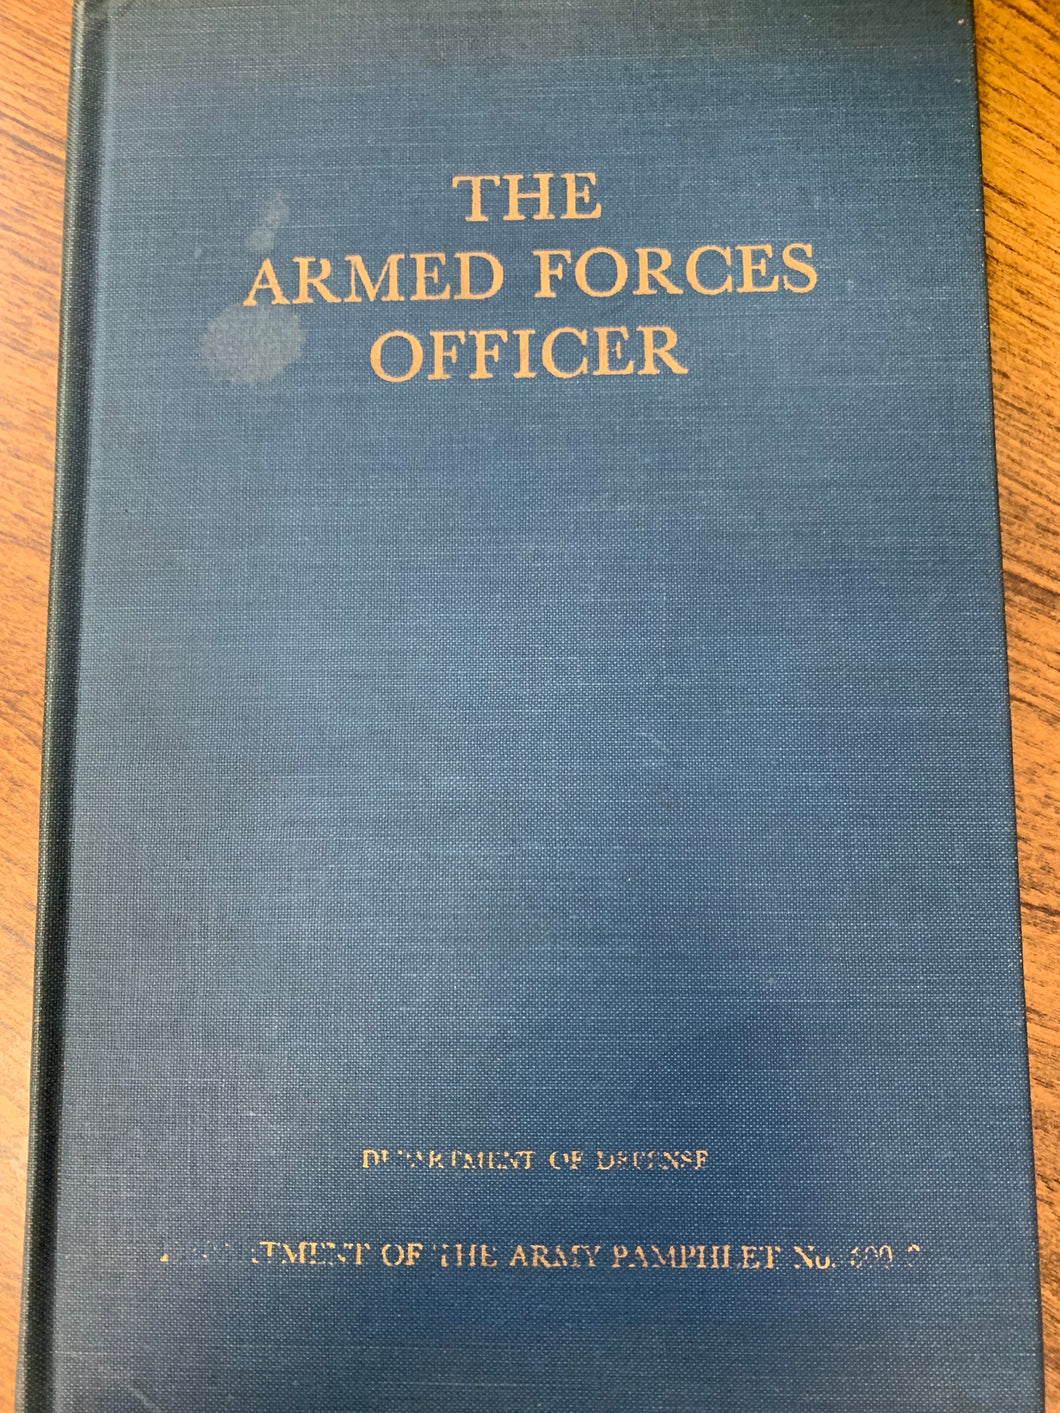 The Armed Forces Officer by U.S. Department of Defense